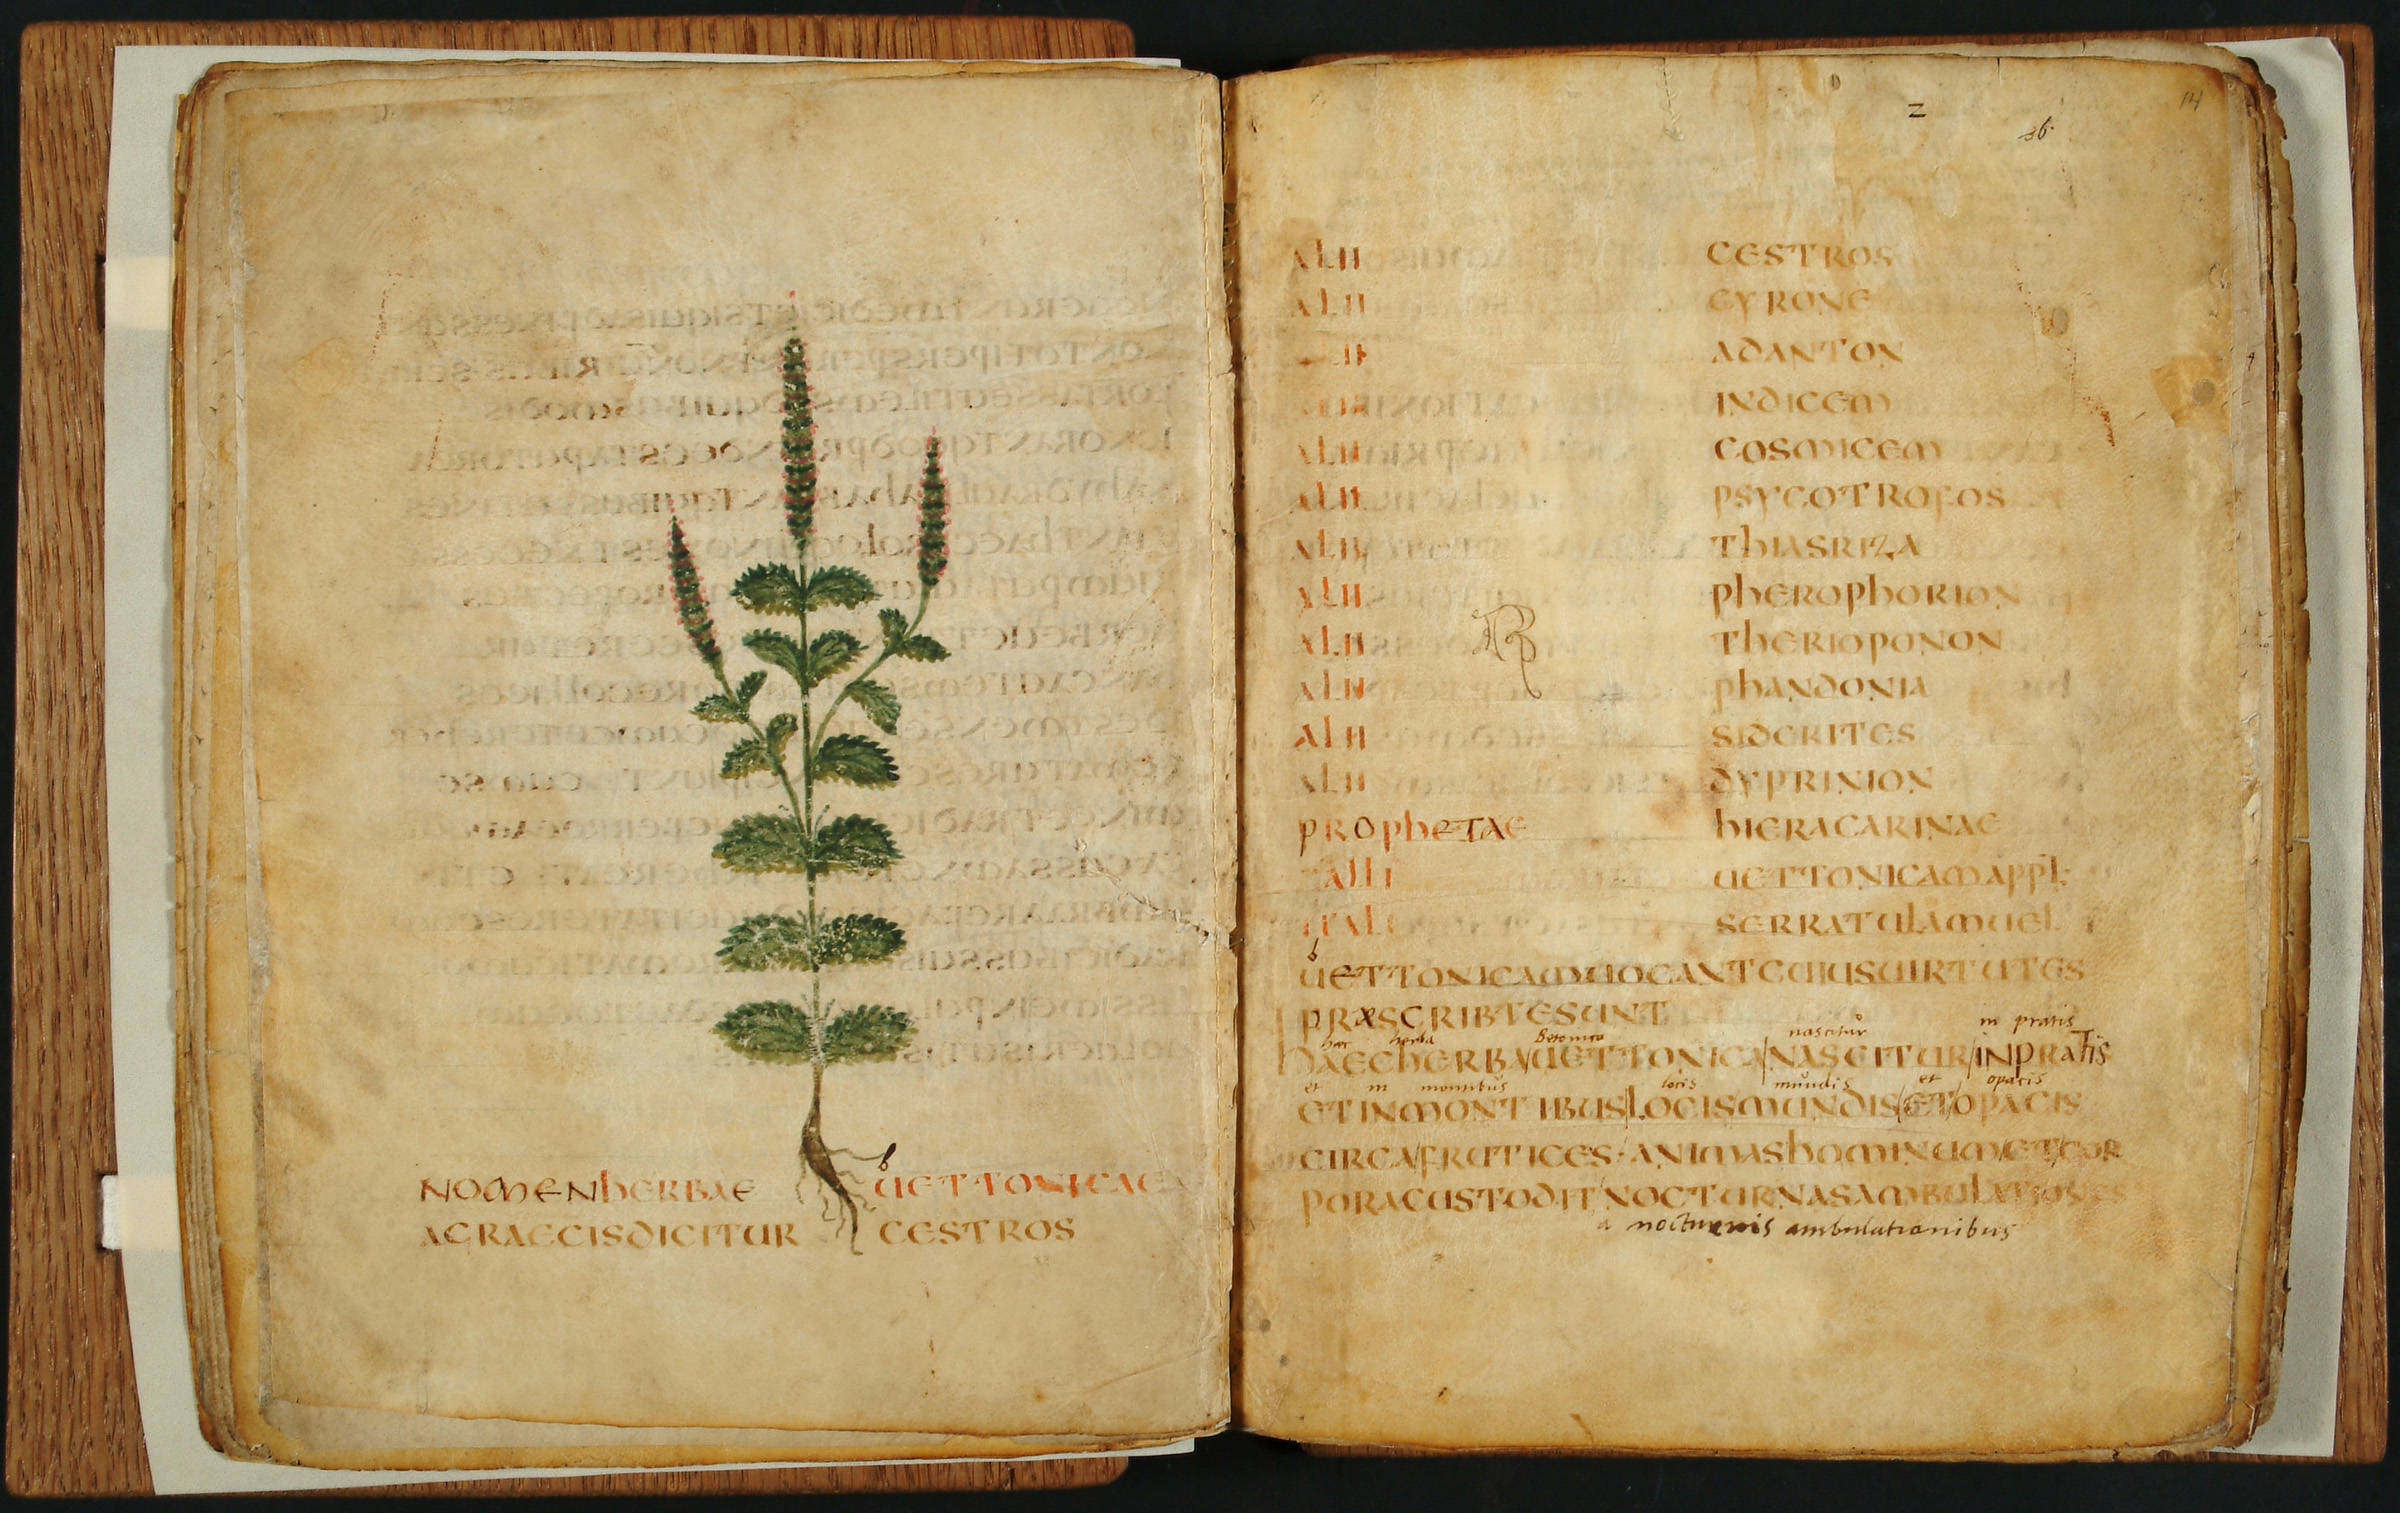 medieval manuscripts used parchment or vellum created from